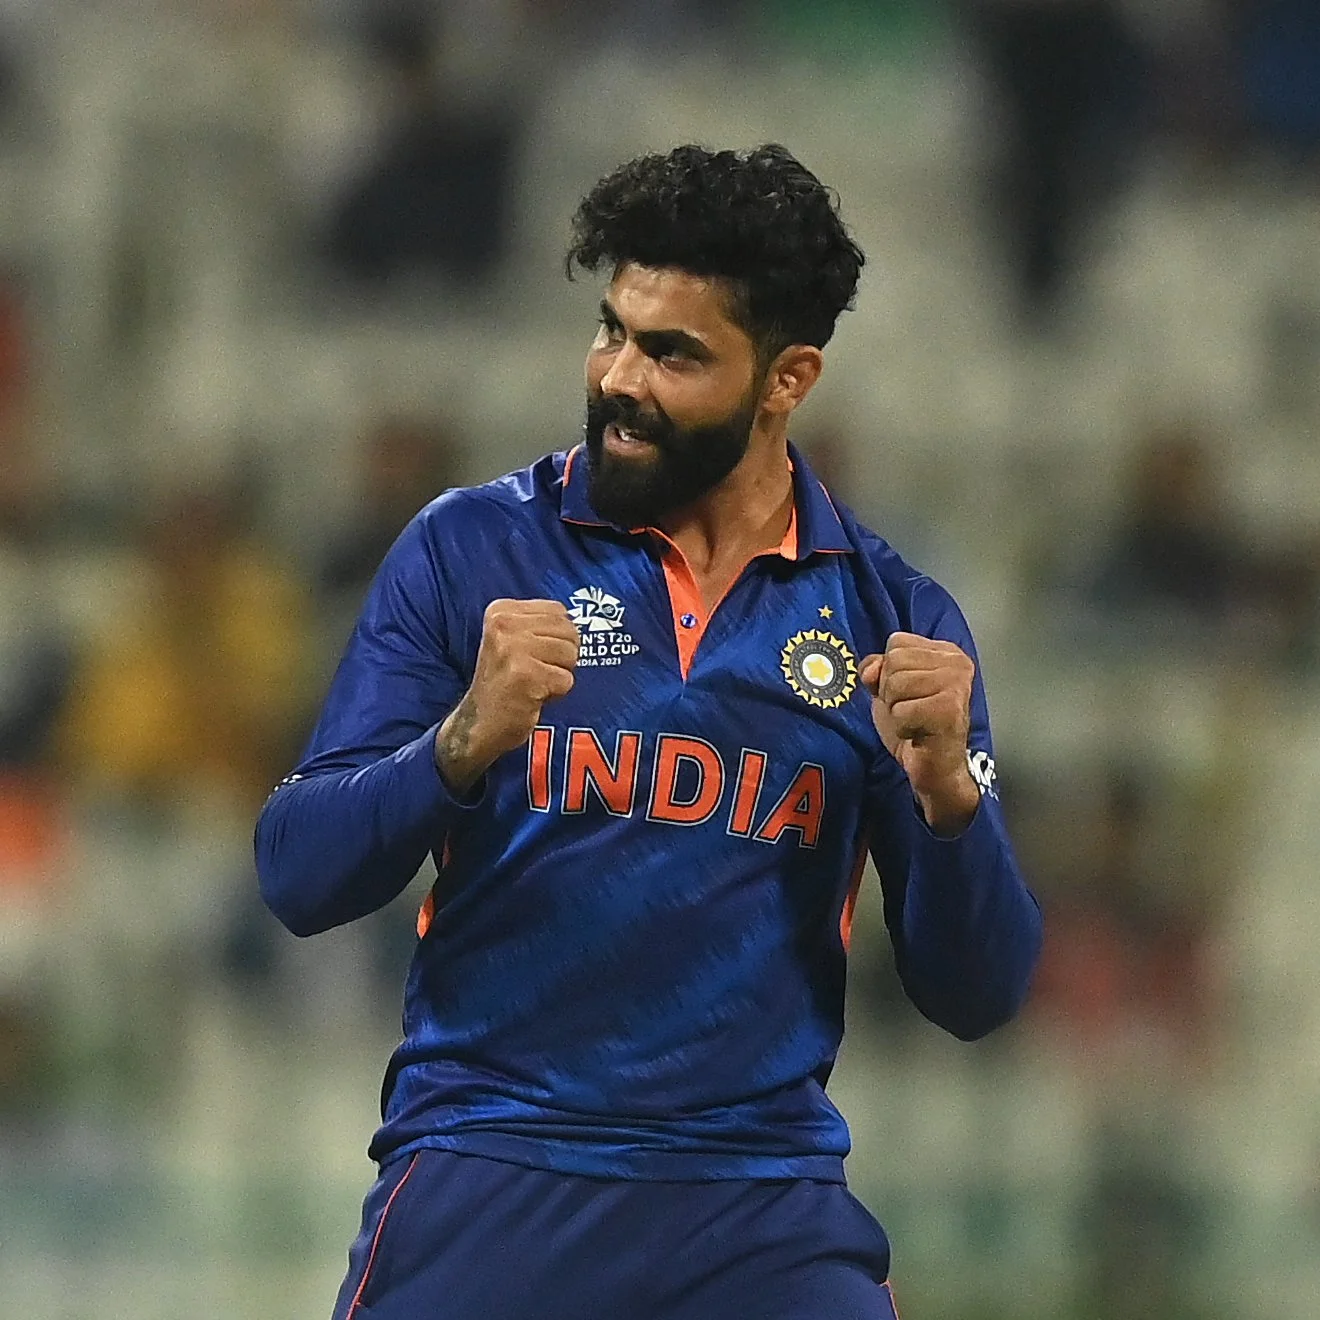 Ravindra Jadeja to come up with a new hairstyle for the upcoming game